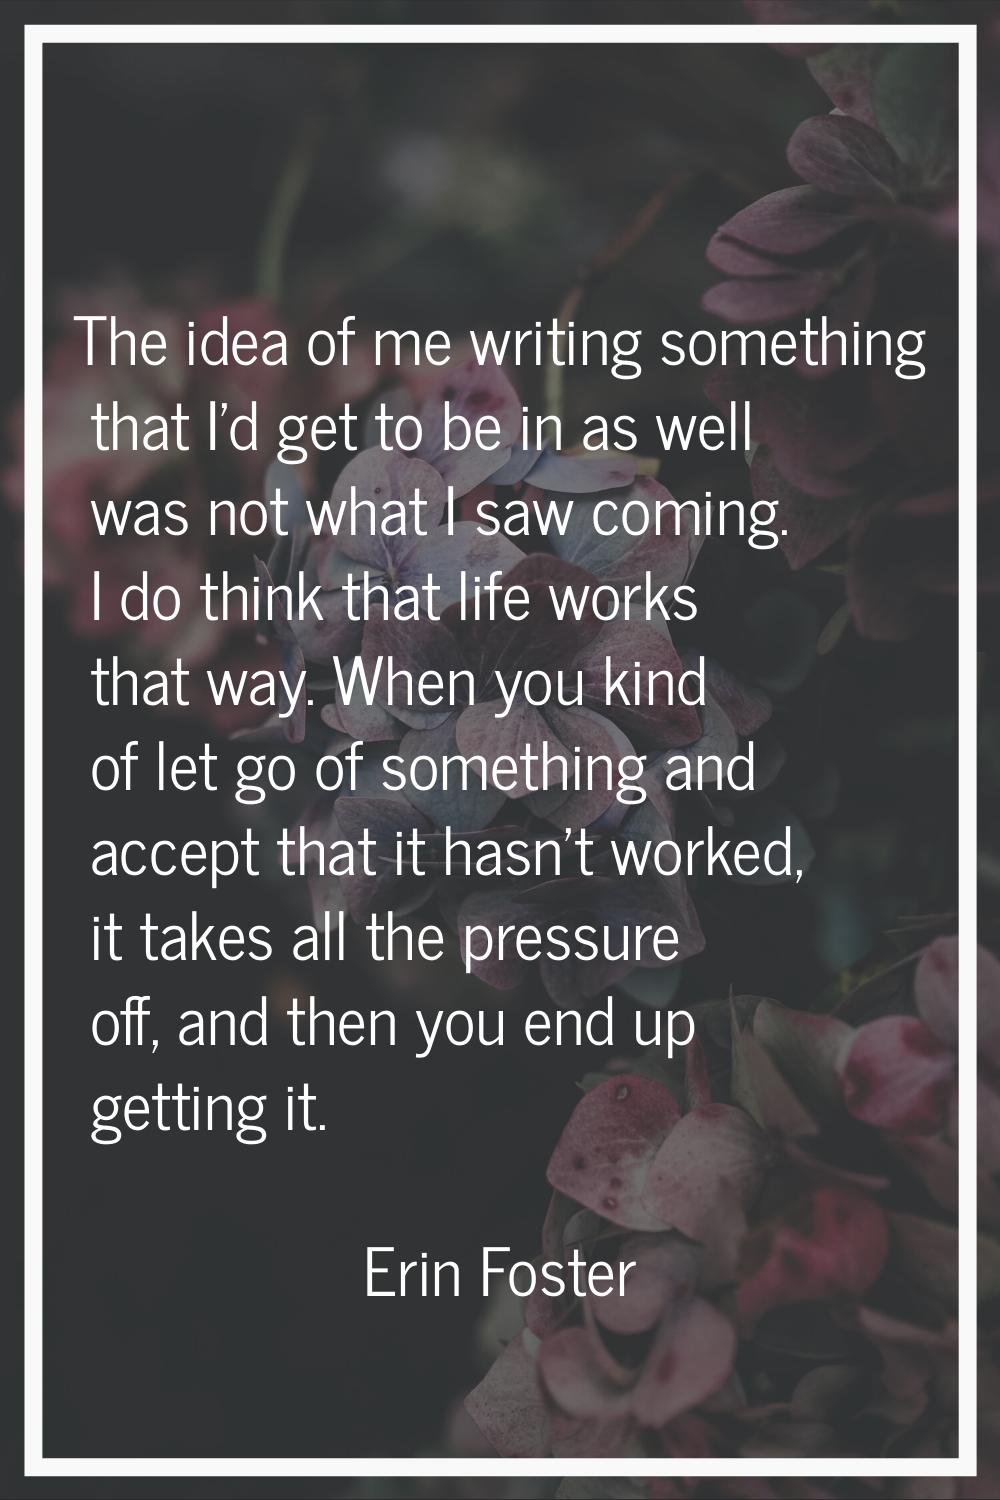 The idea of me writing something that I'd get to be in as well was not what I saw coming. I do thin